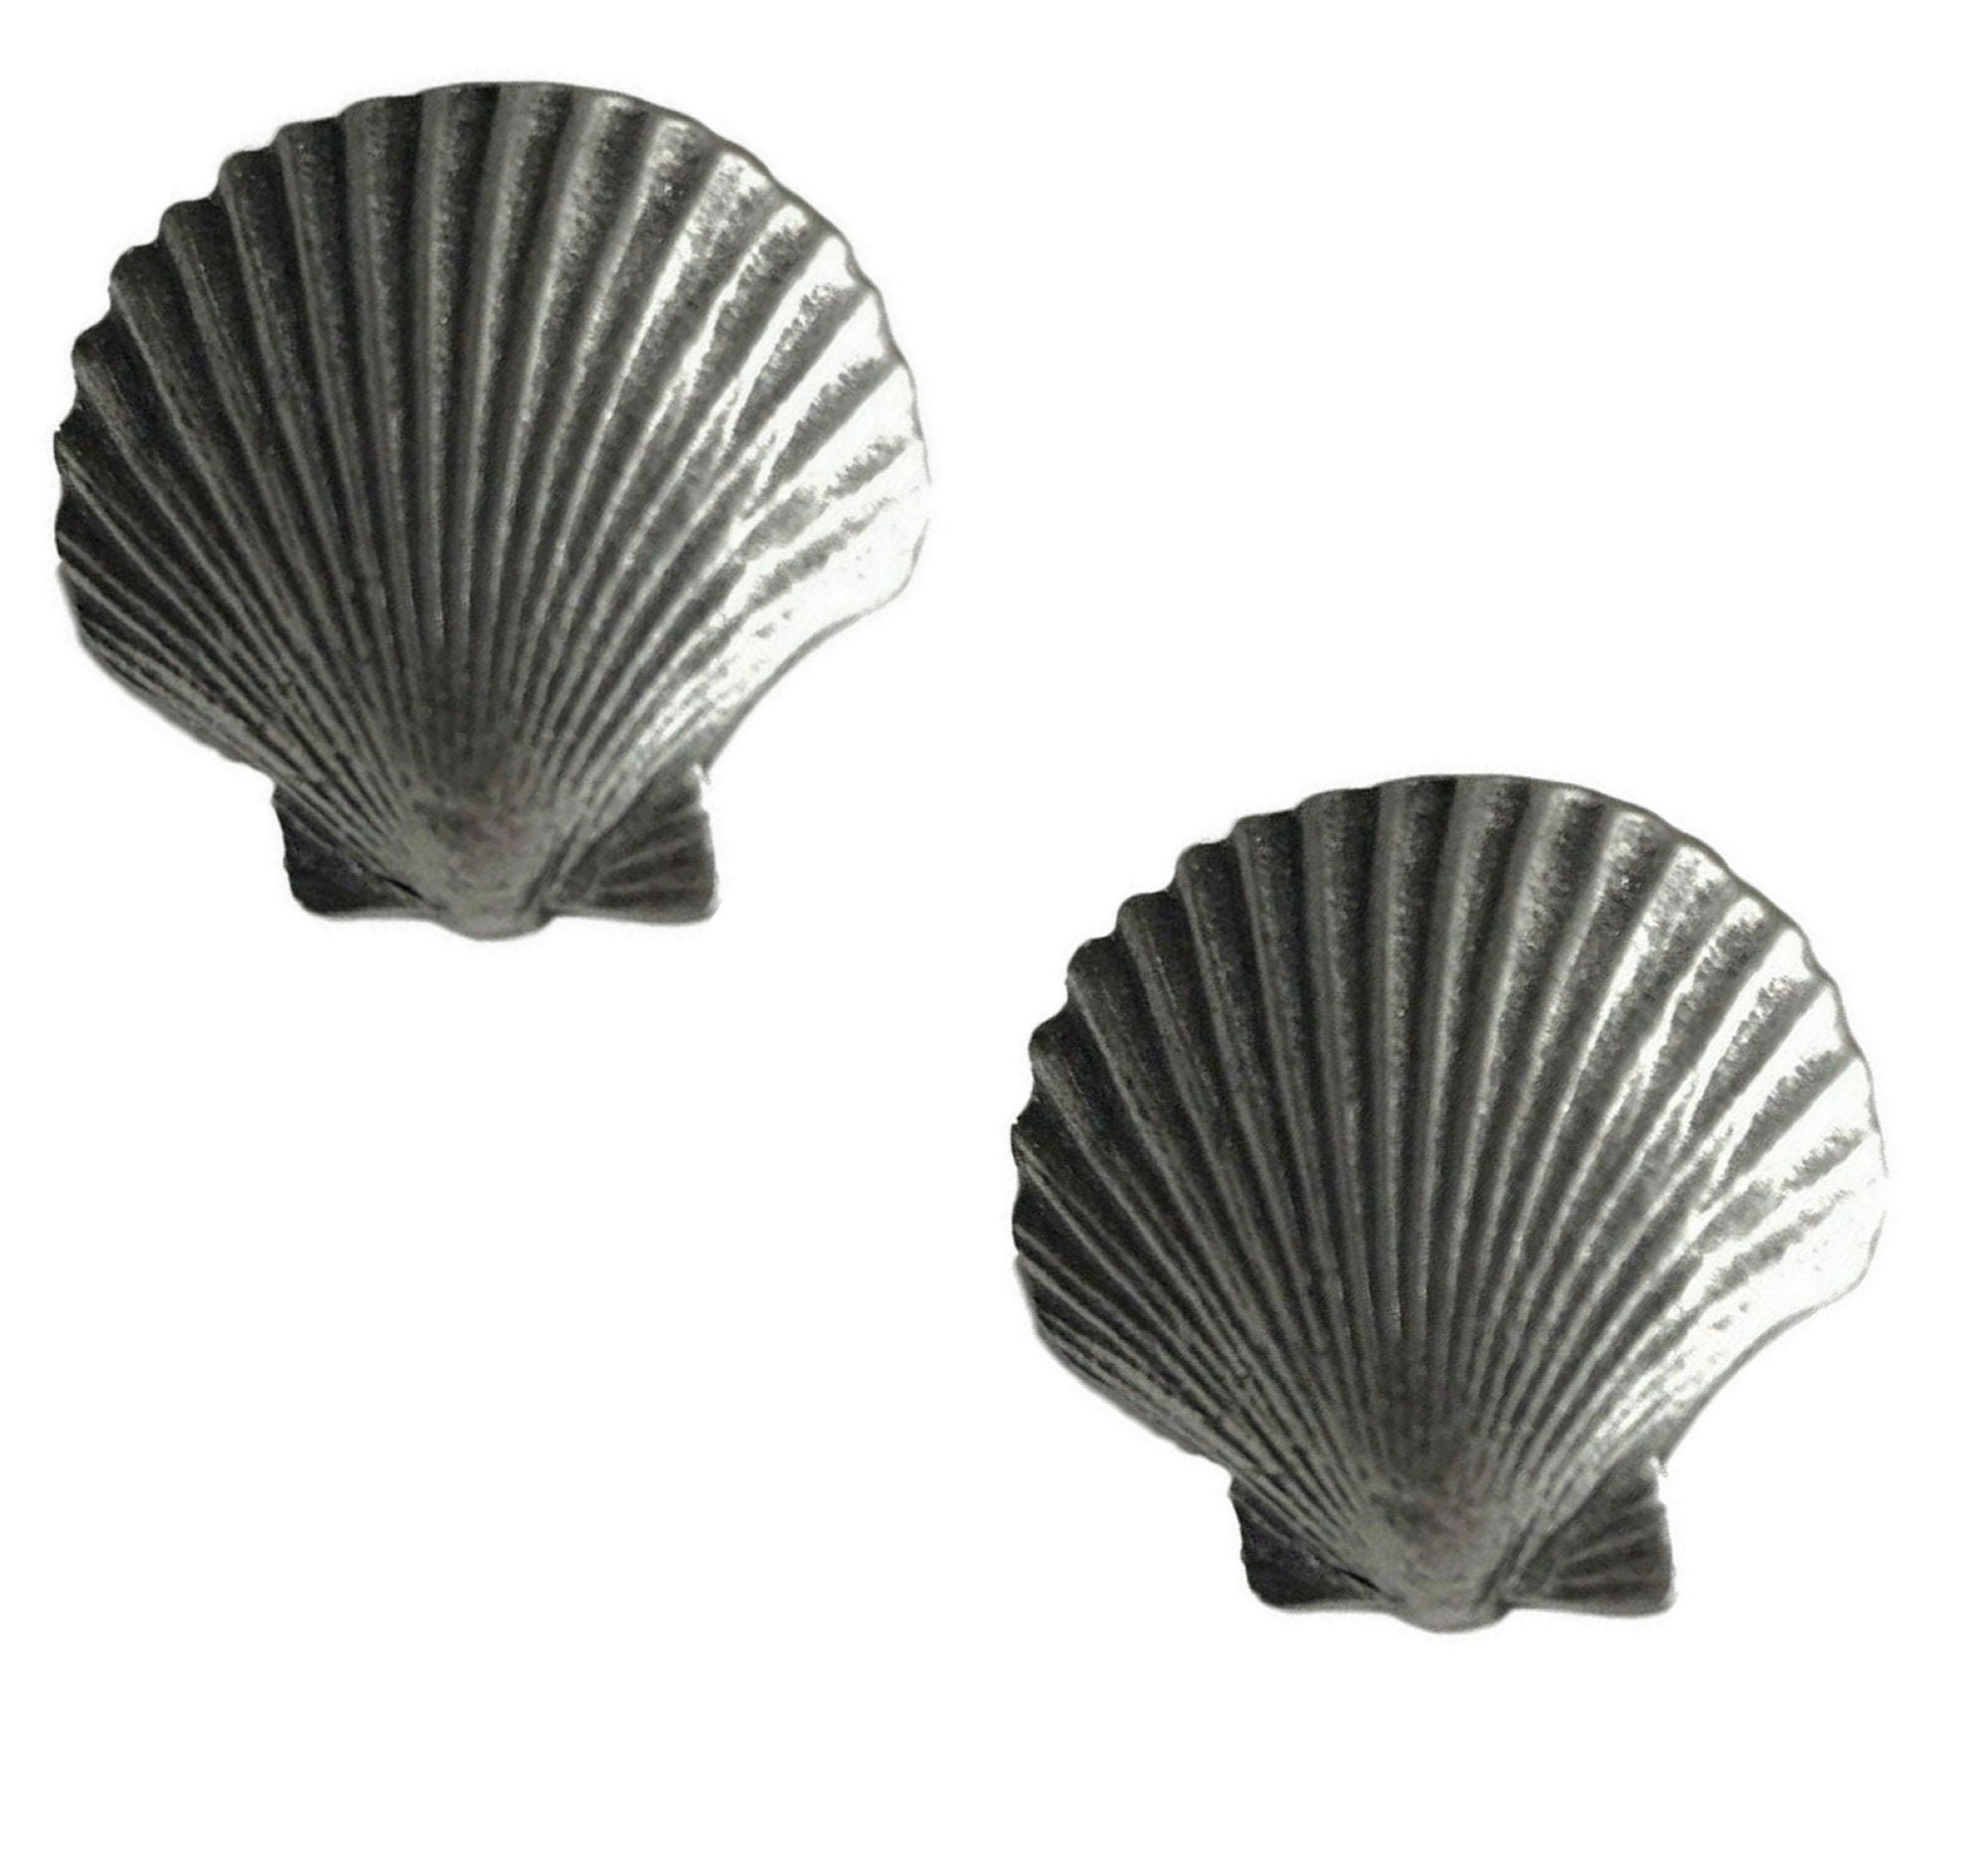 Cockle Shell Pin Badge Tie Pin Pewter Scallop XWTP122 Lapel Pin Badge 